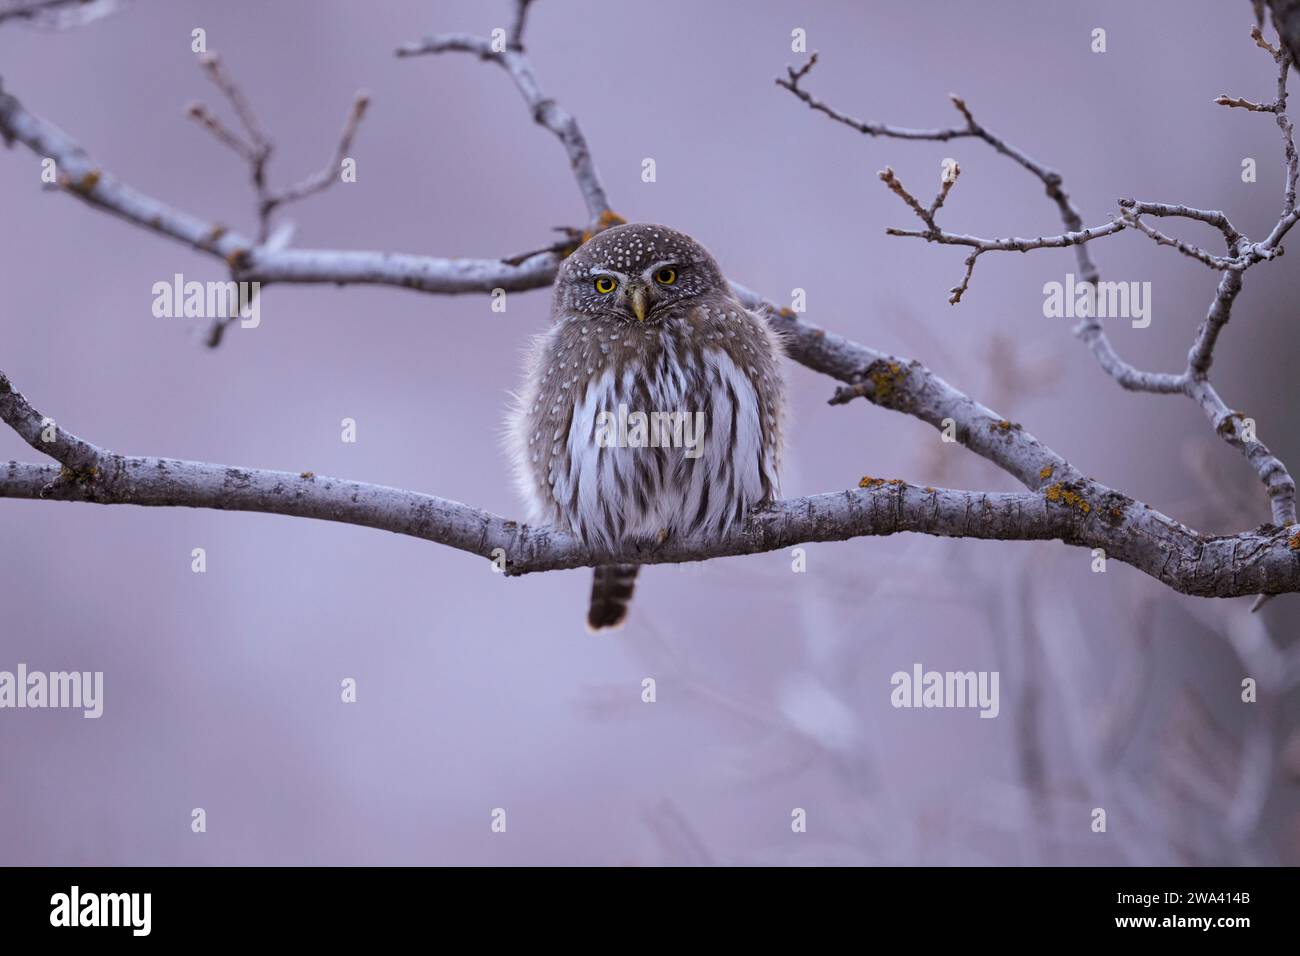 Northern pygmy owl perched on branch Stock Photo